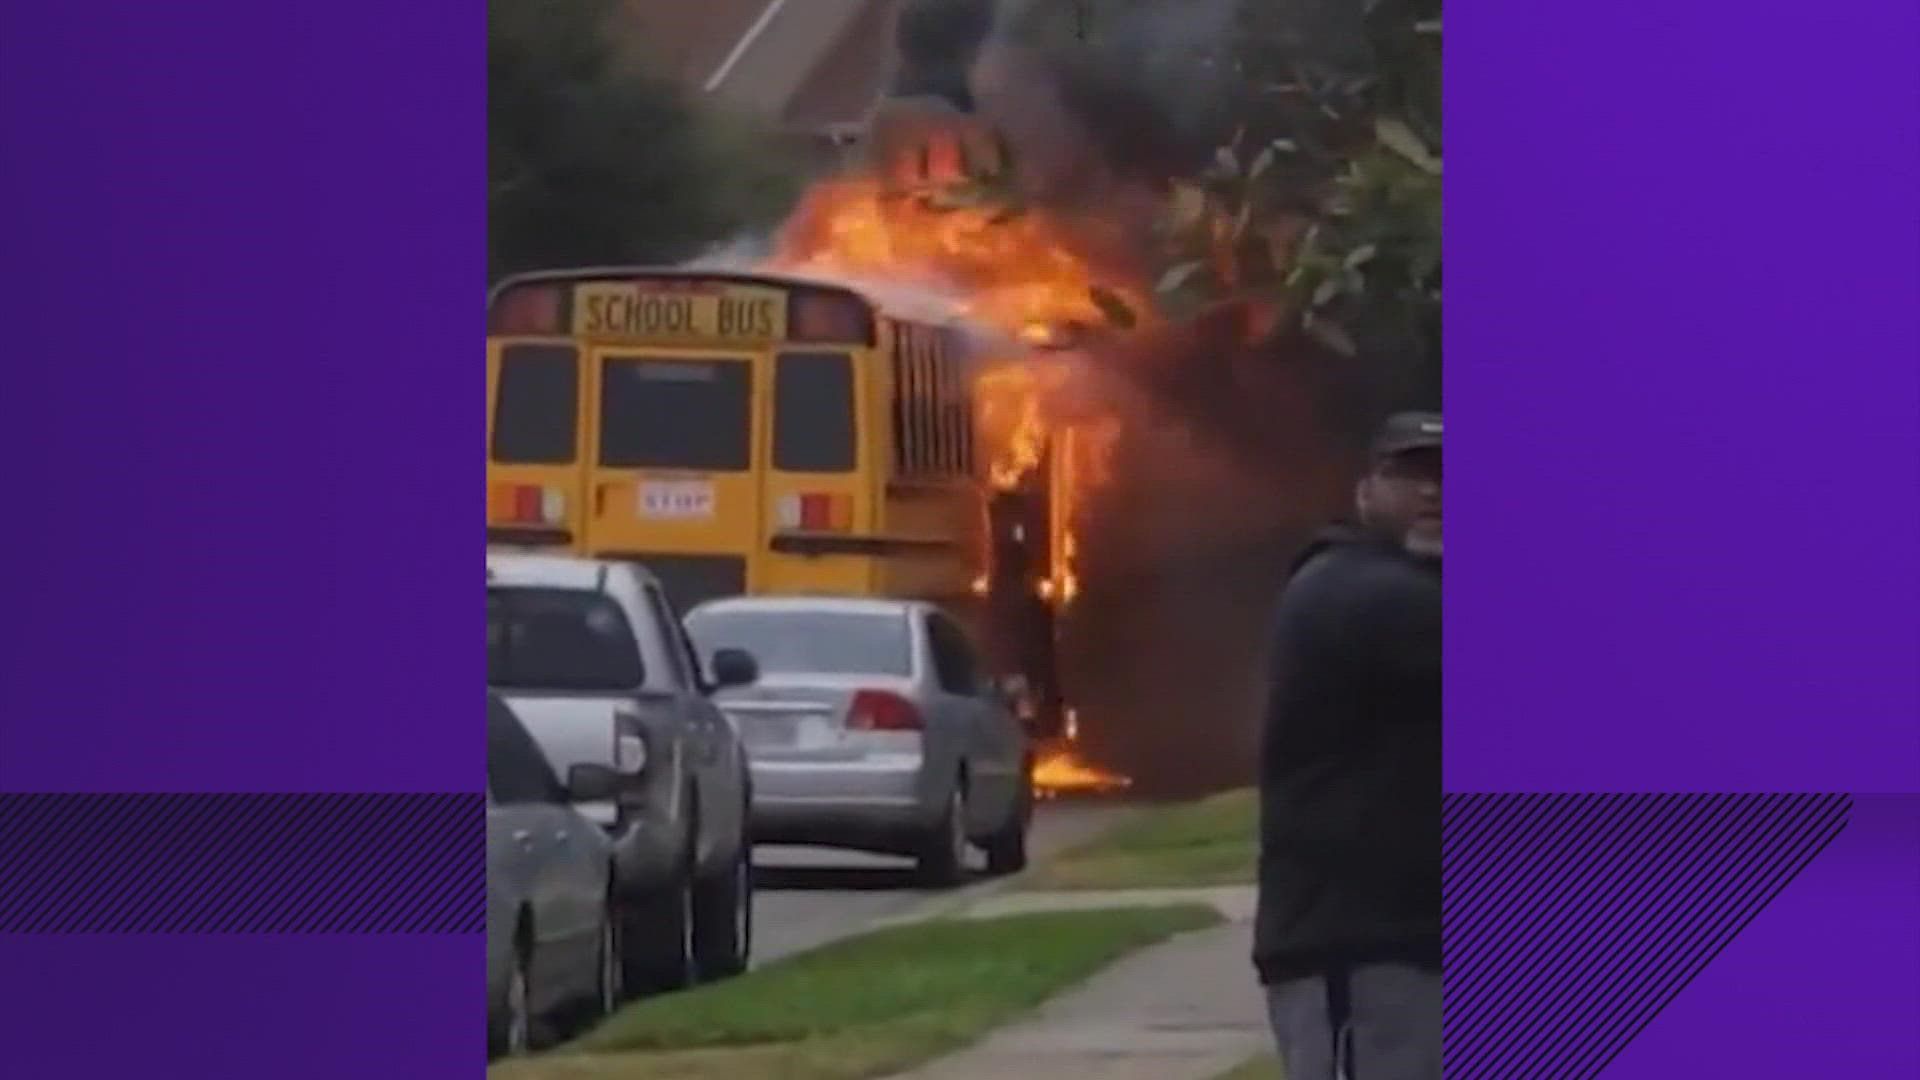 New video shows a Dickinson ISD school bus driver getting his kids and himself to safety moments before the bus burst into flames.